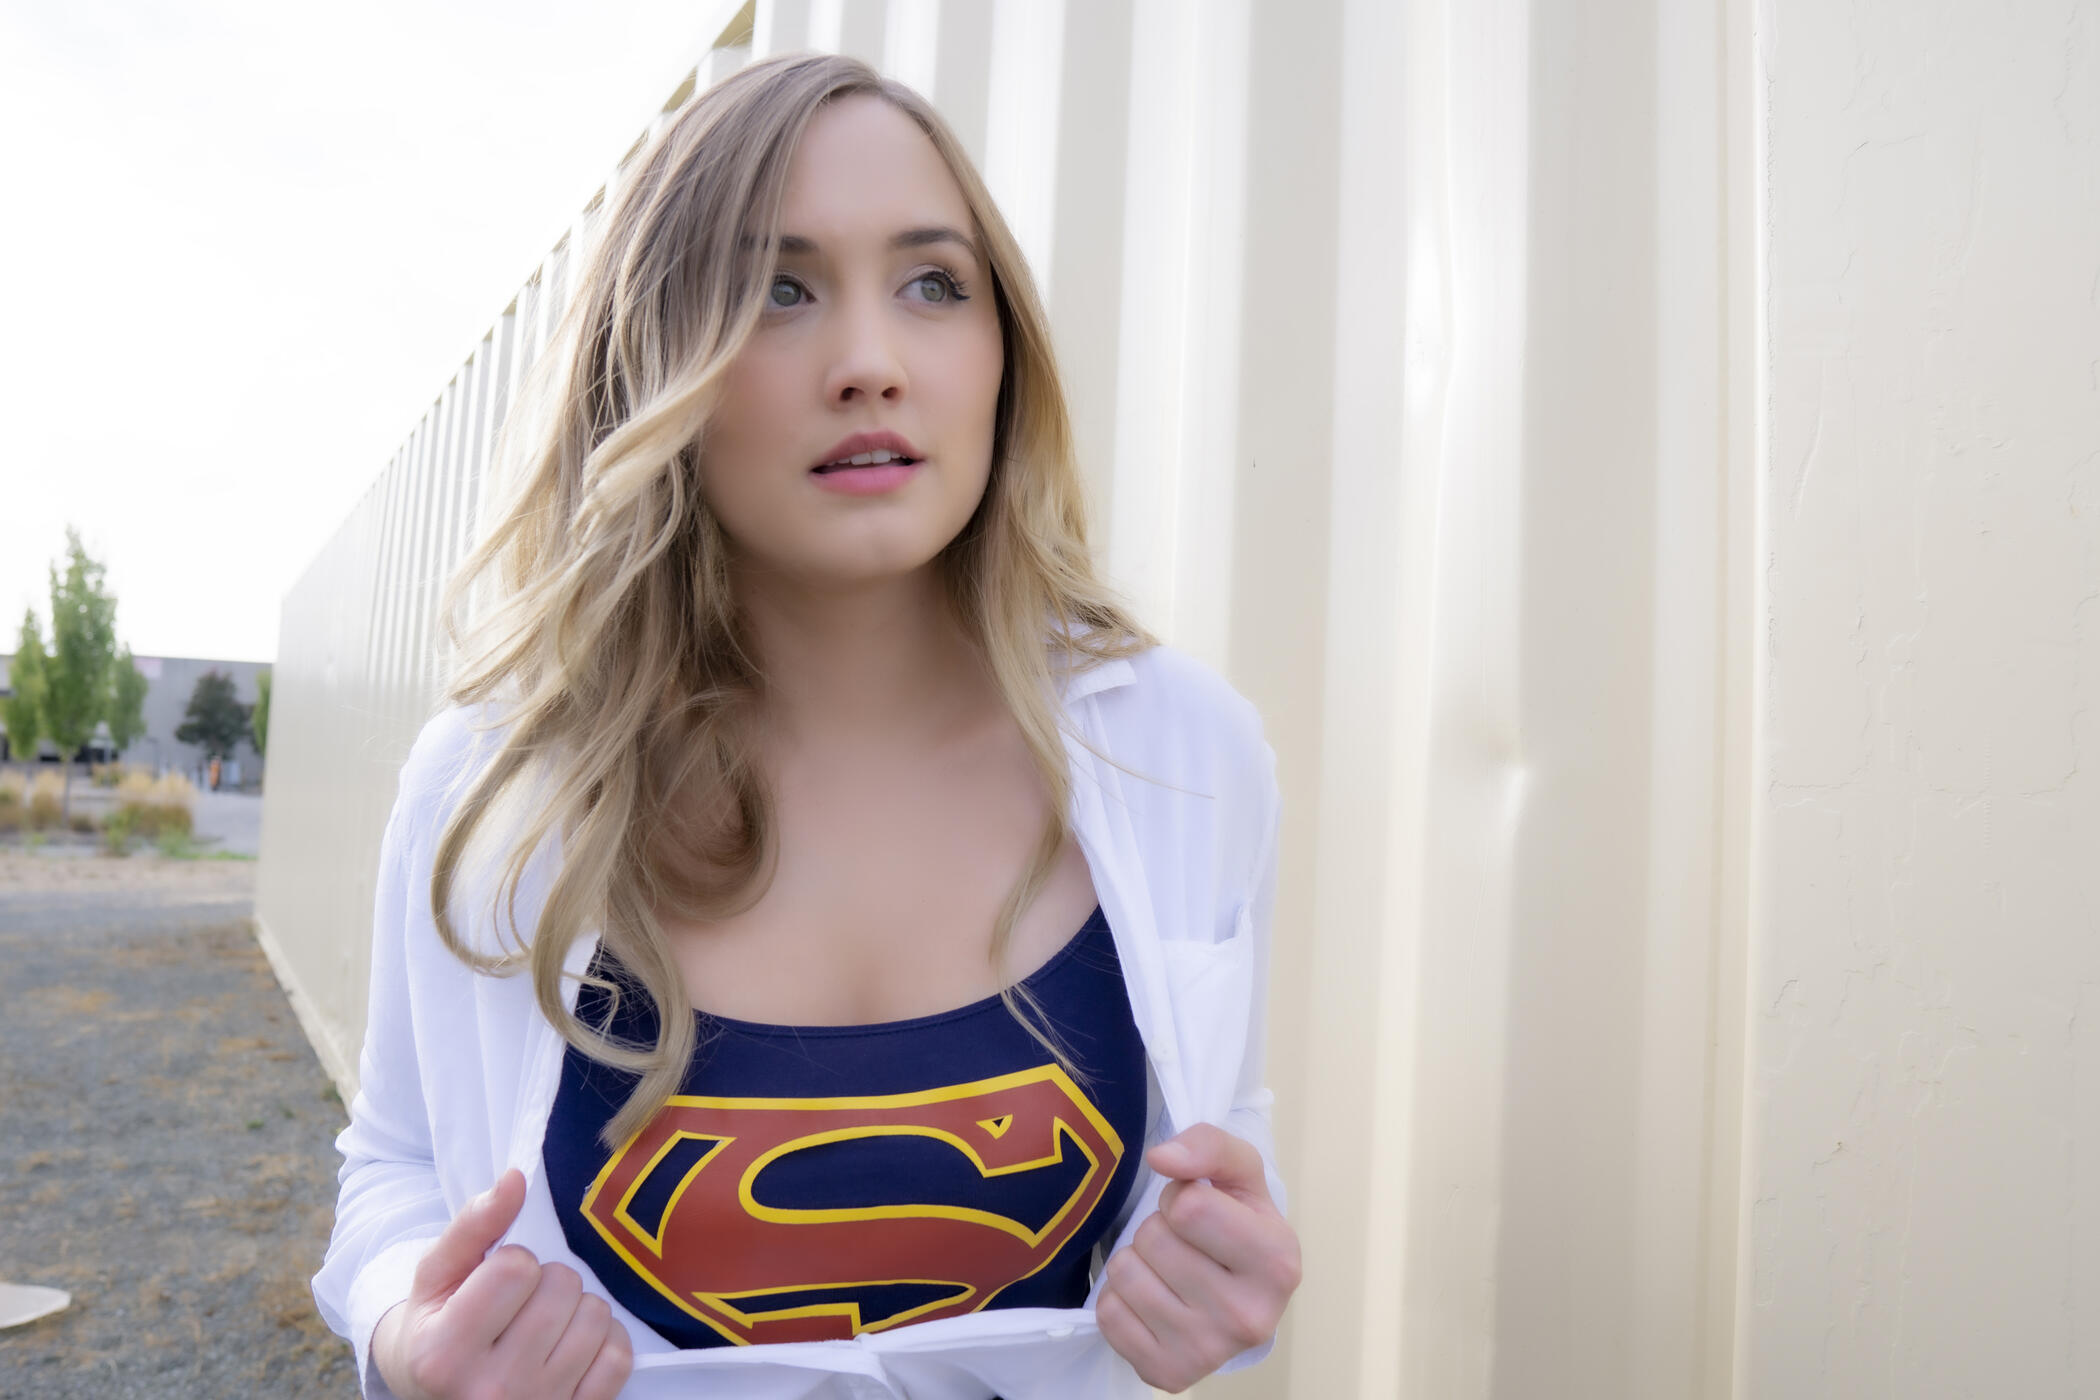 Naomi Kyle from IGN.